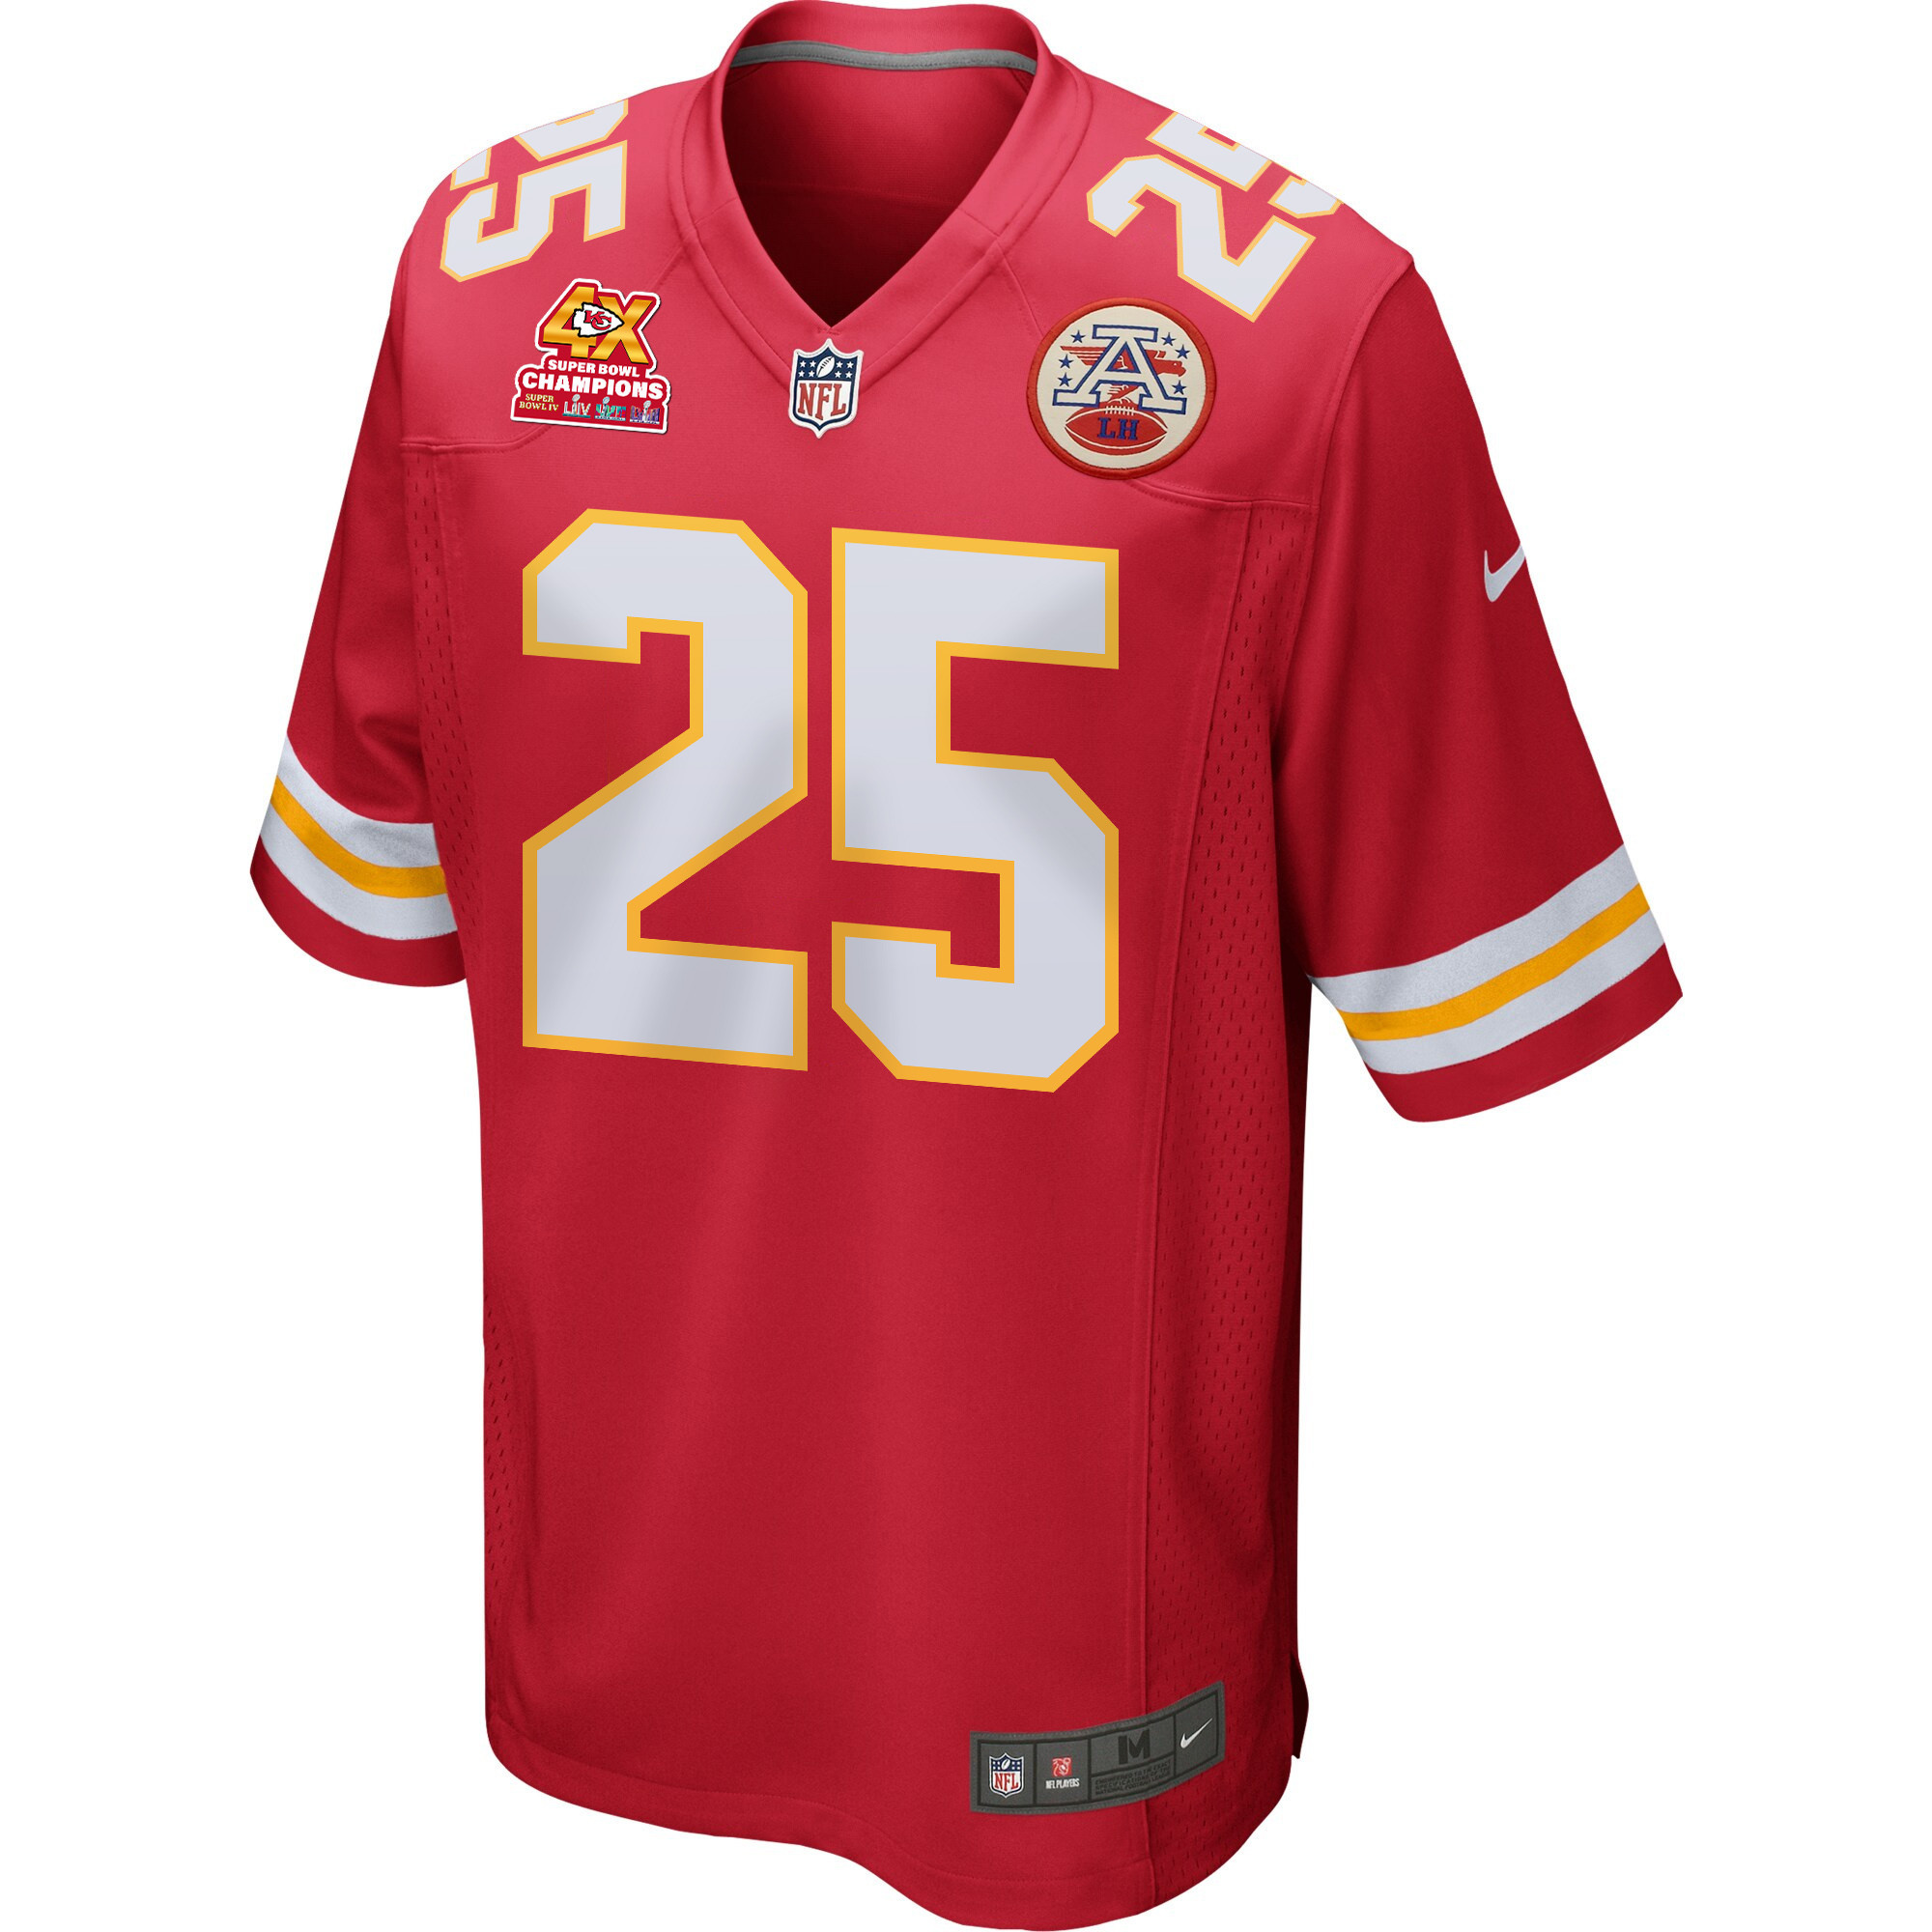 Clyde Edwards-Helaire 25 Kansas City Chiefs Super Bowl LVIII Champions 4X Game Men Jersey - Red